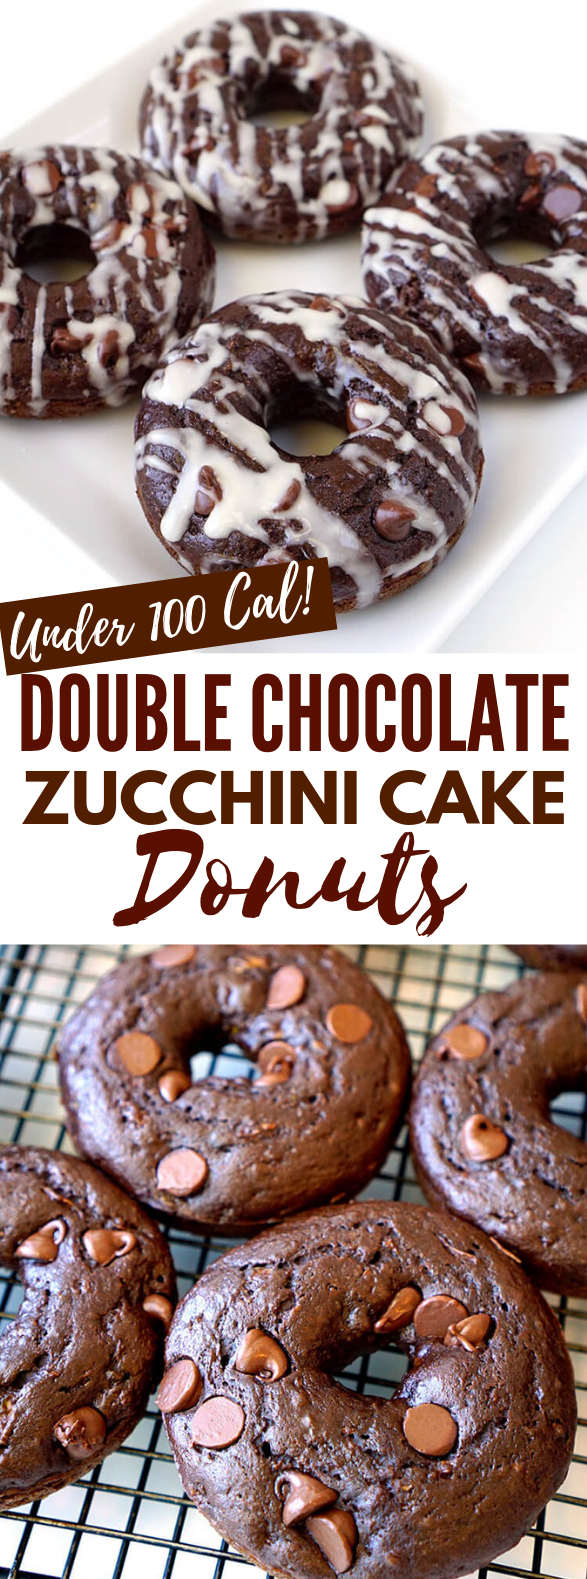 DOUBLE CHOCOLATE ZUCCHINI CAKE DONUTS #healthy #diet